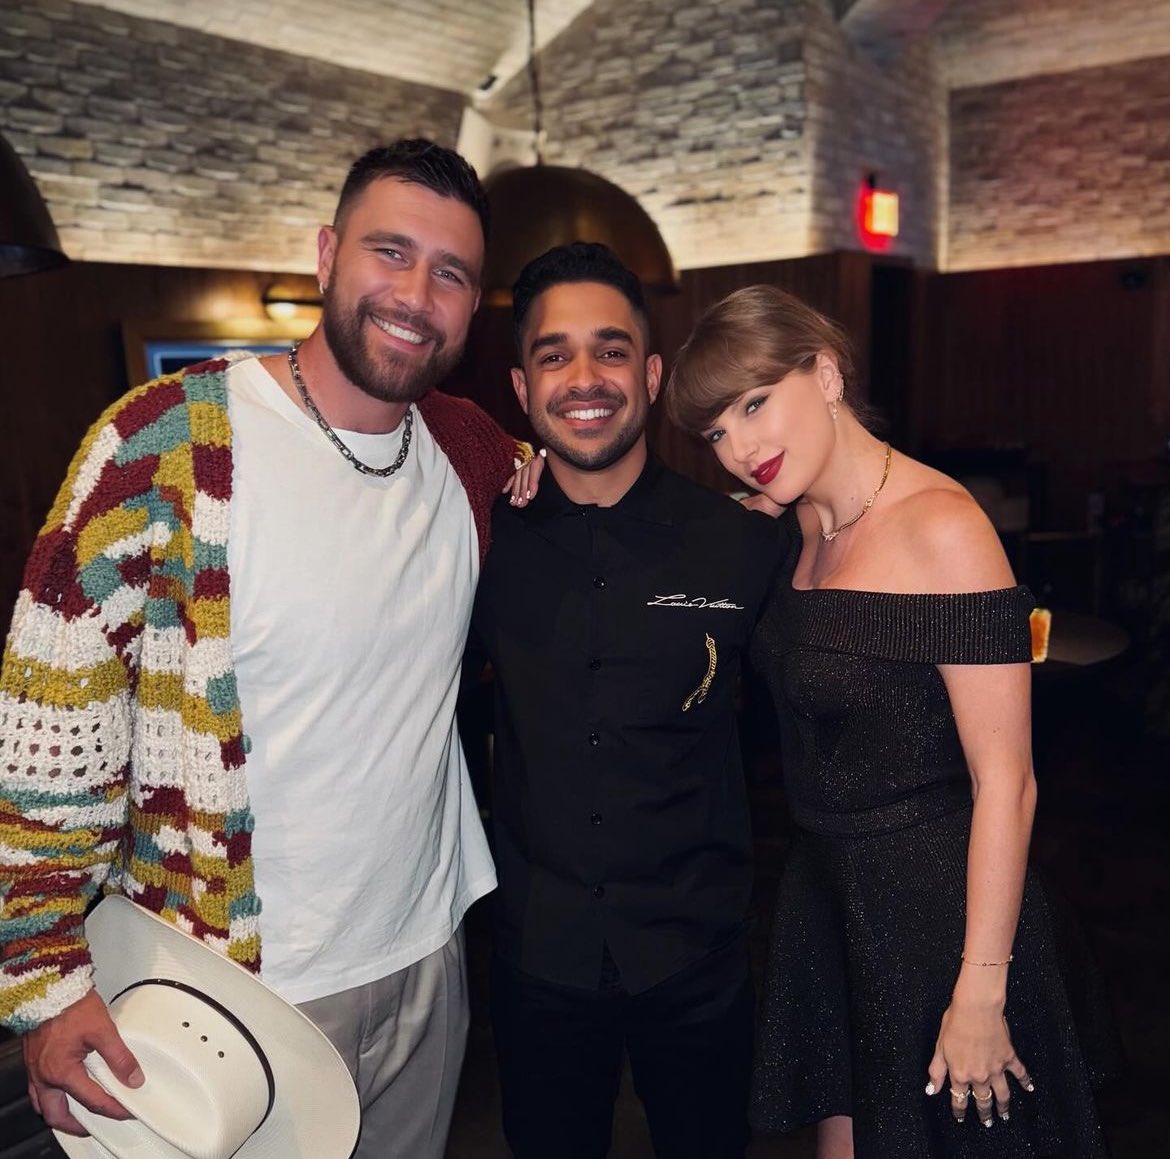 📸| Taylor & Travis at Toca Madera in Vegas last weekend!